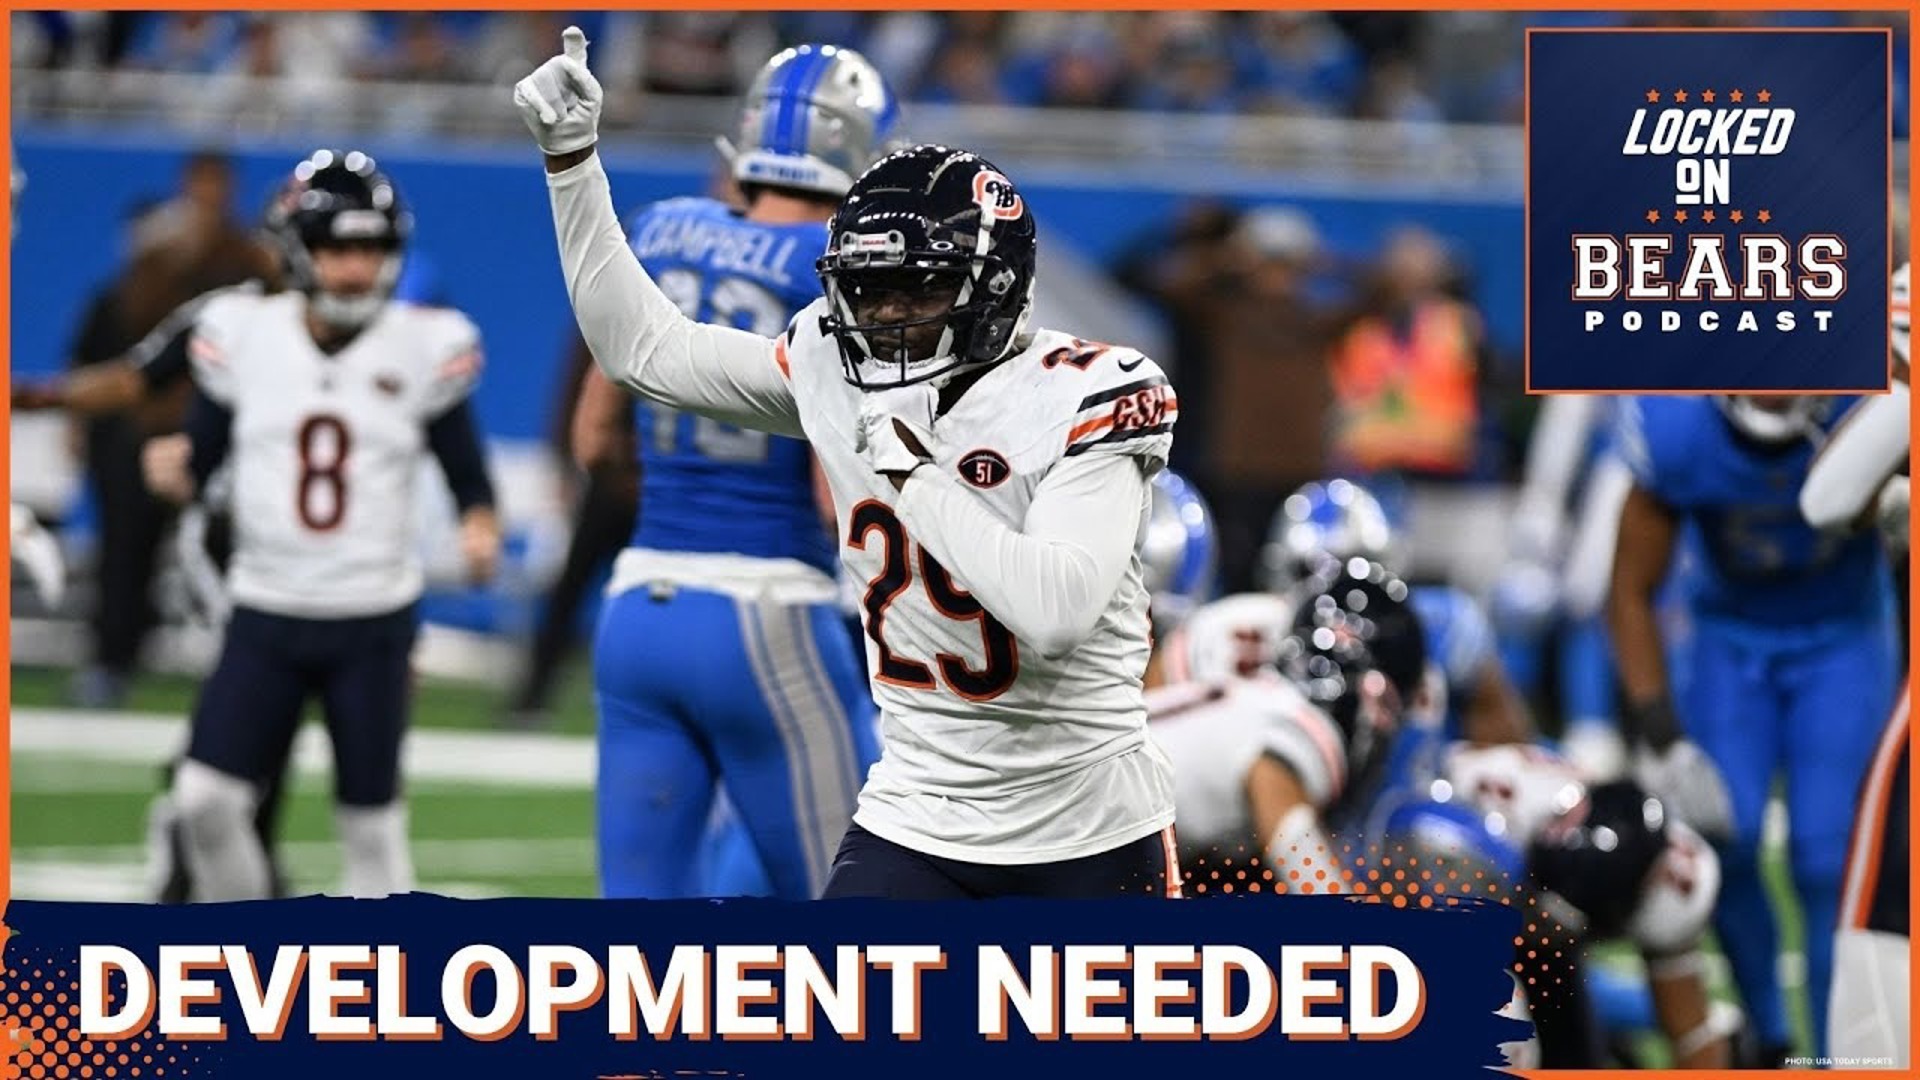 The Chicago Bears have recent draft picks filling big roles and key positions, and it is critical that they make good progress in their development this season.